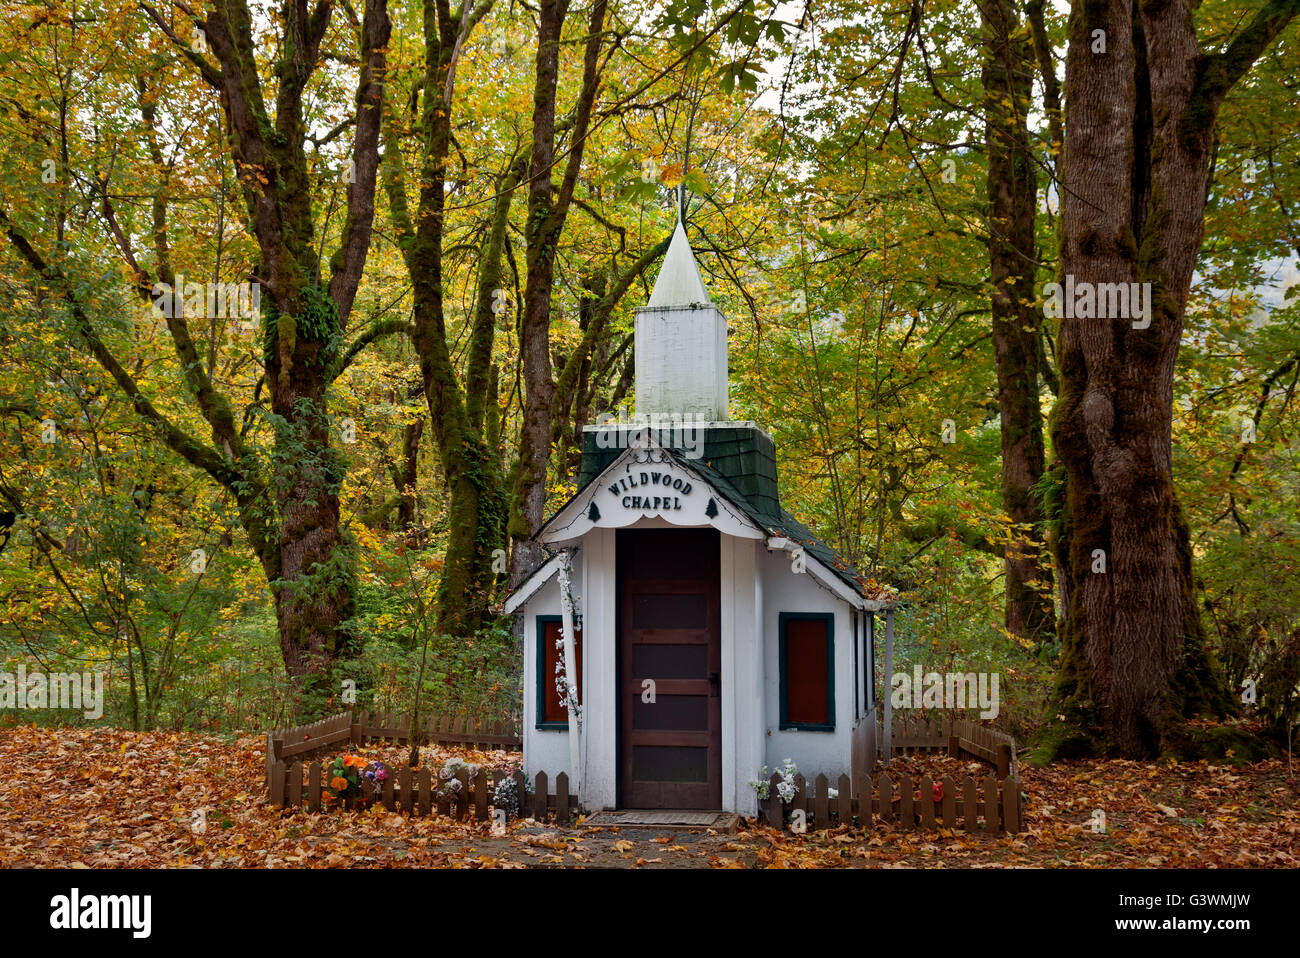 WASHINGTON - Wildwood Chapel, a small roadside place of worship among the moss-covered trees along US Highway 20 at Marblemount. Stock Photo